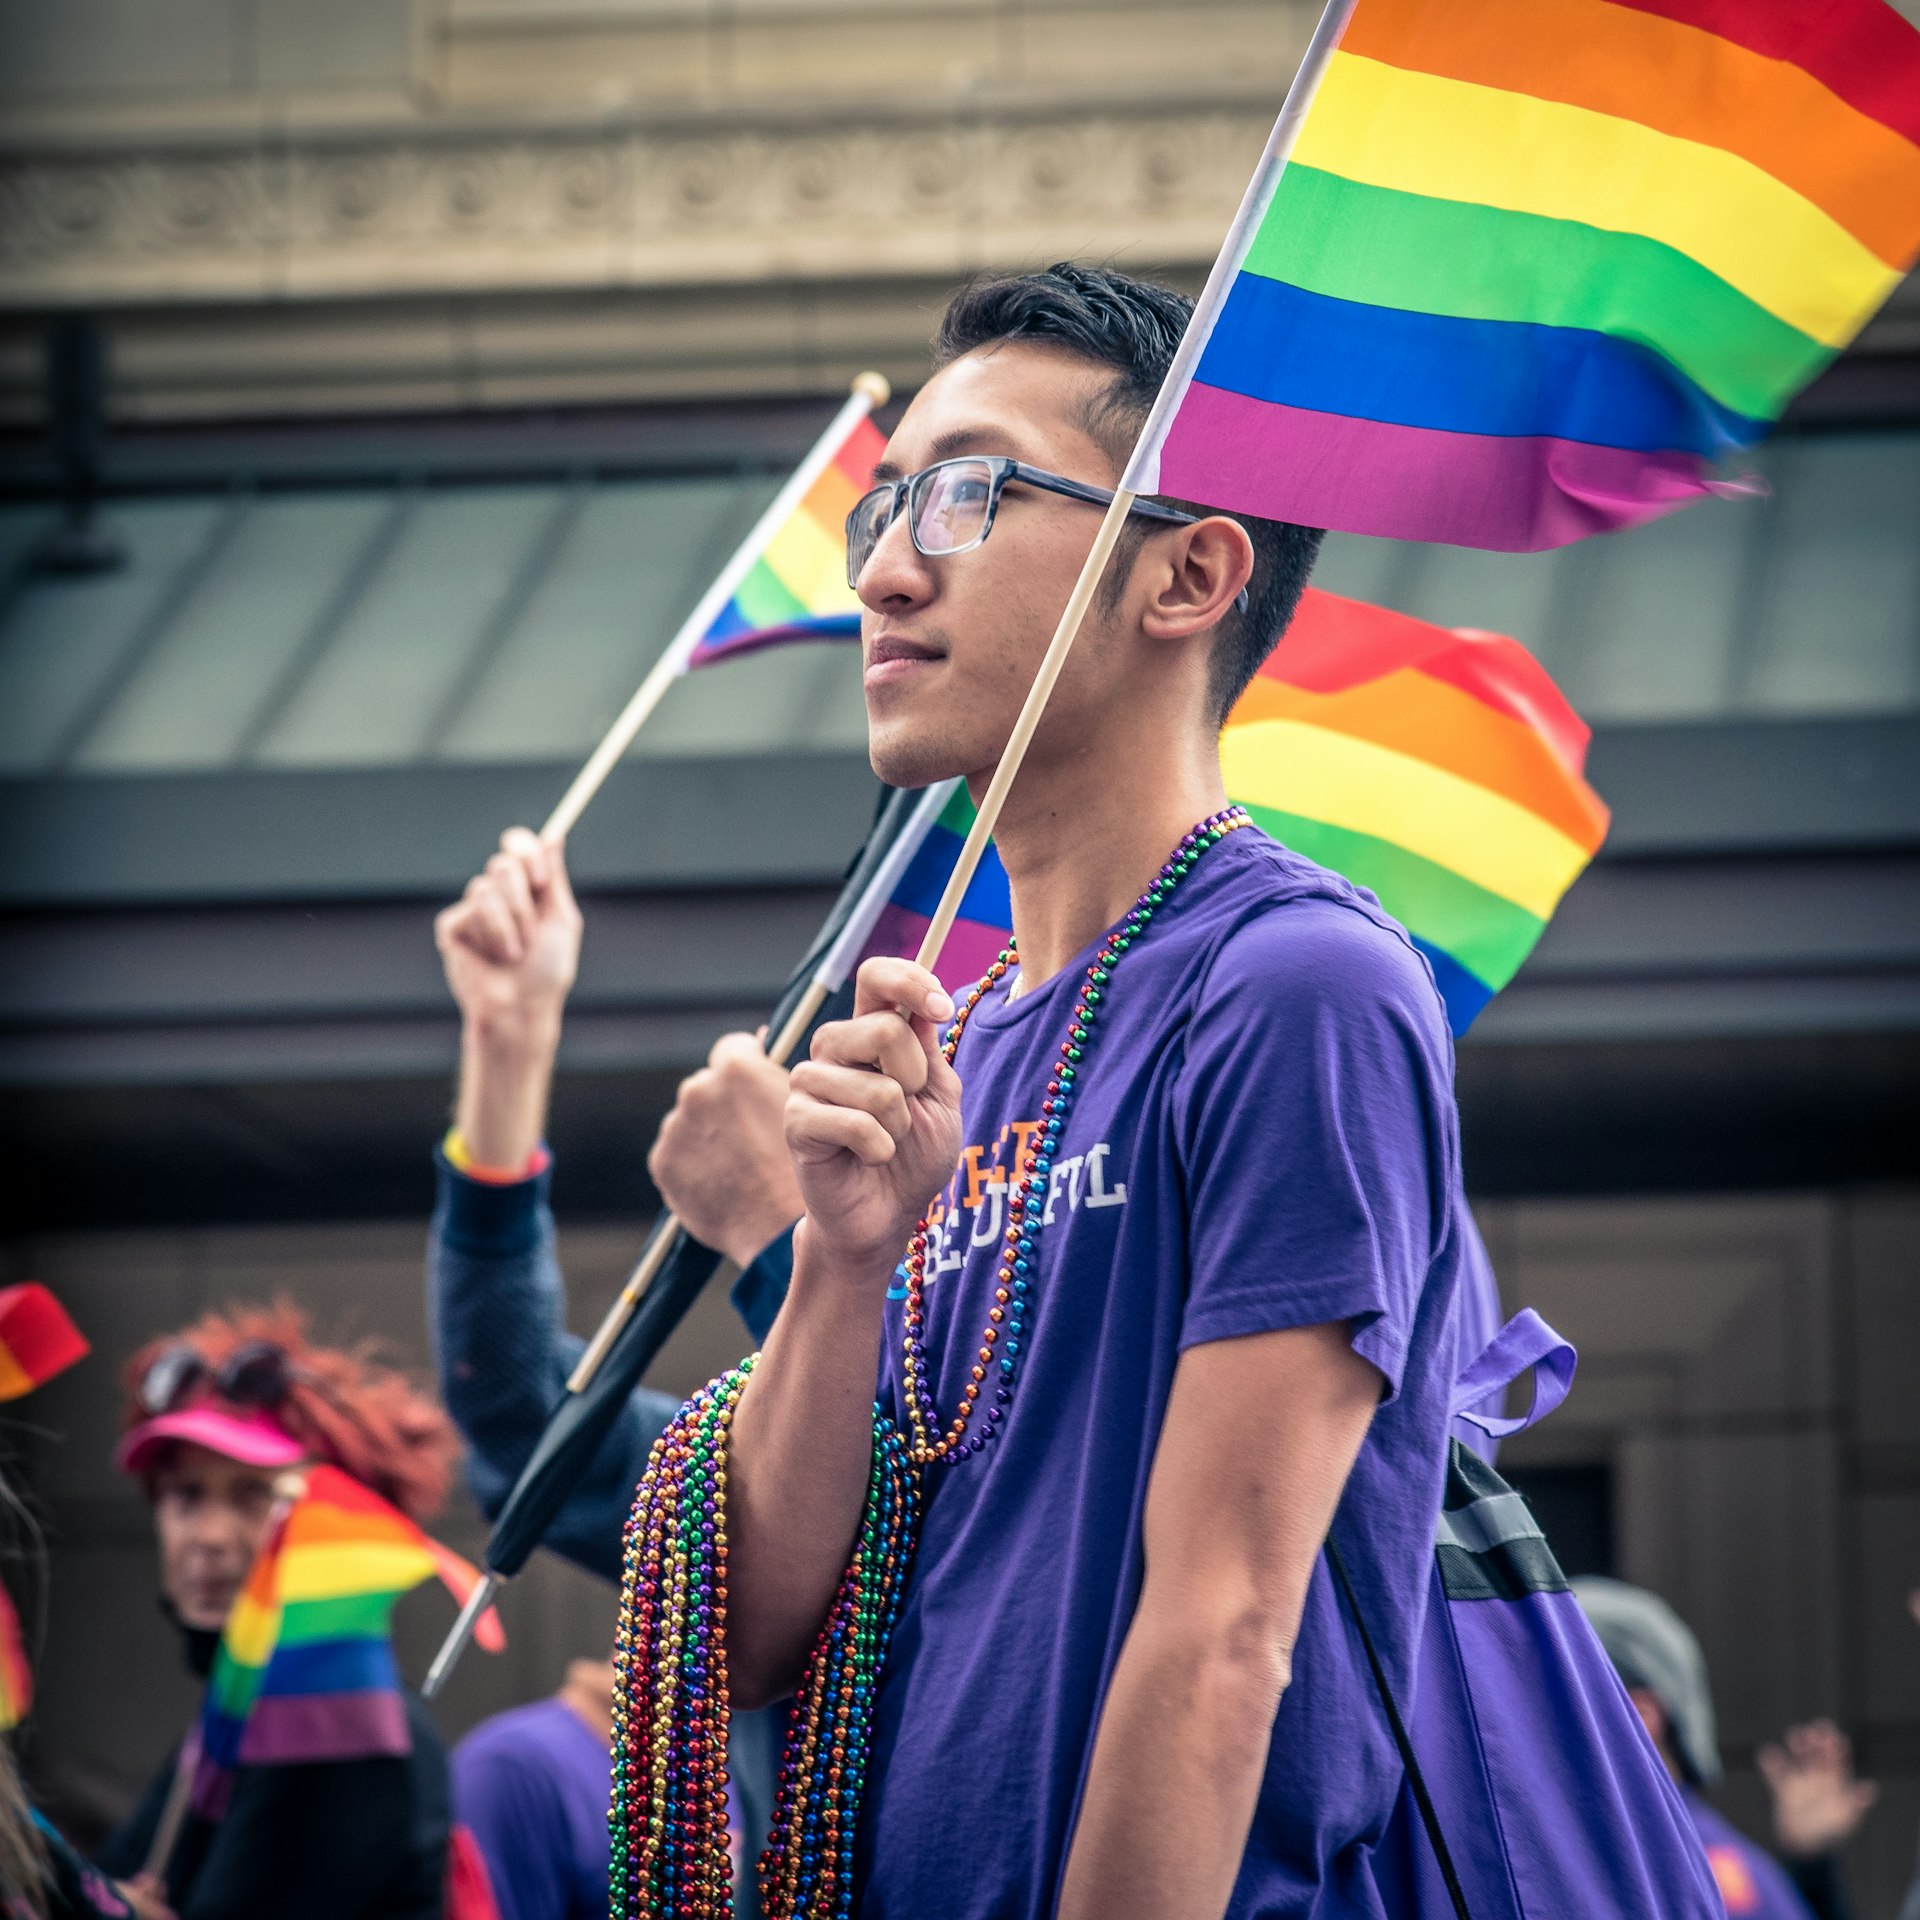 Man carrying a Pride flag at the Twin Cities Pride Celebration in Minneapolis